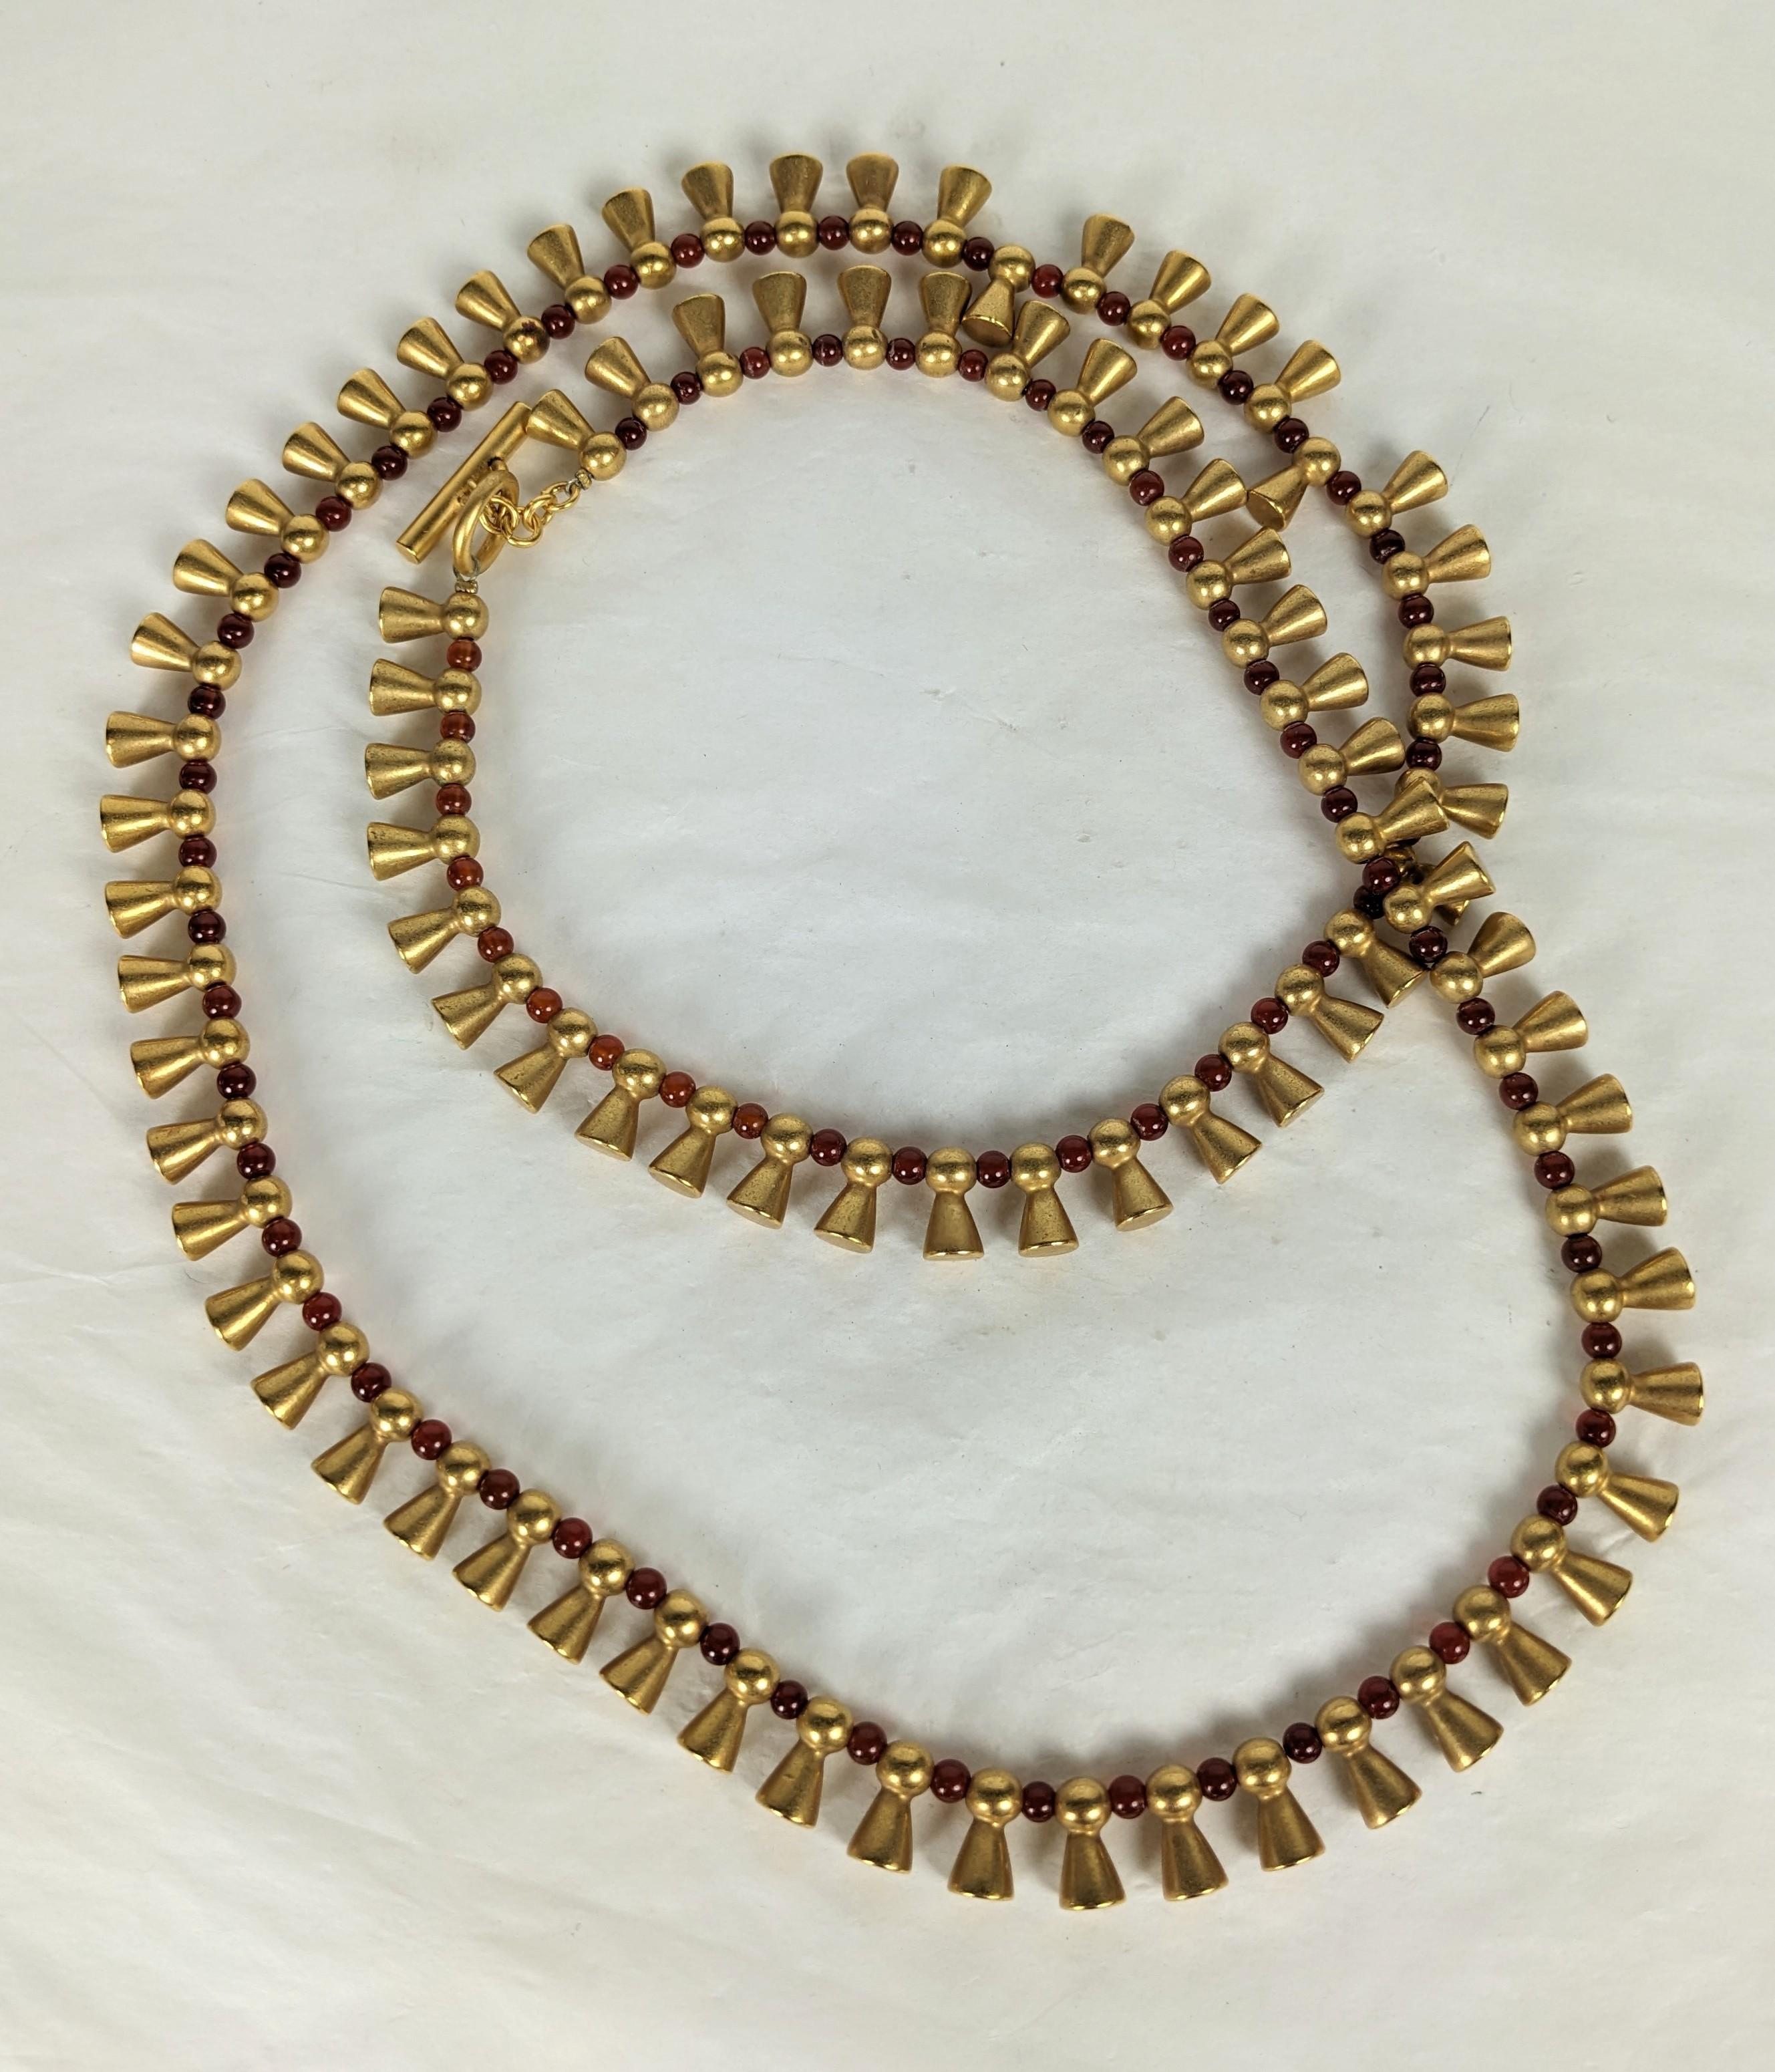 Elegant Matte Gold and Carnelian Pate de Verre Necklace by Varga from the 1990's. Matte Gold pendants with a Pre Columbian feel are spaced with pate de verre beads replicating carnelian. T bar closure for versatility. 1990's USA. 36